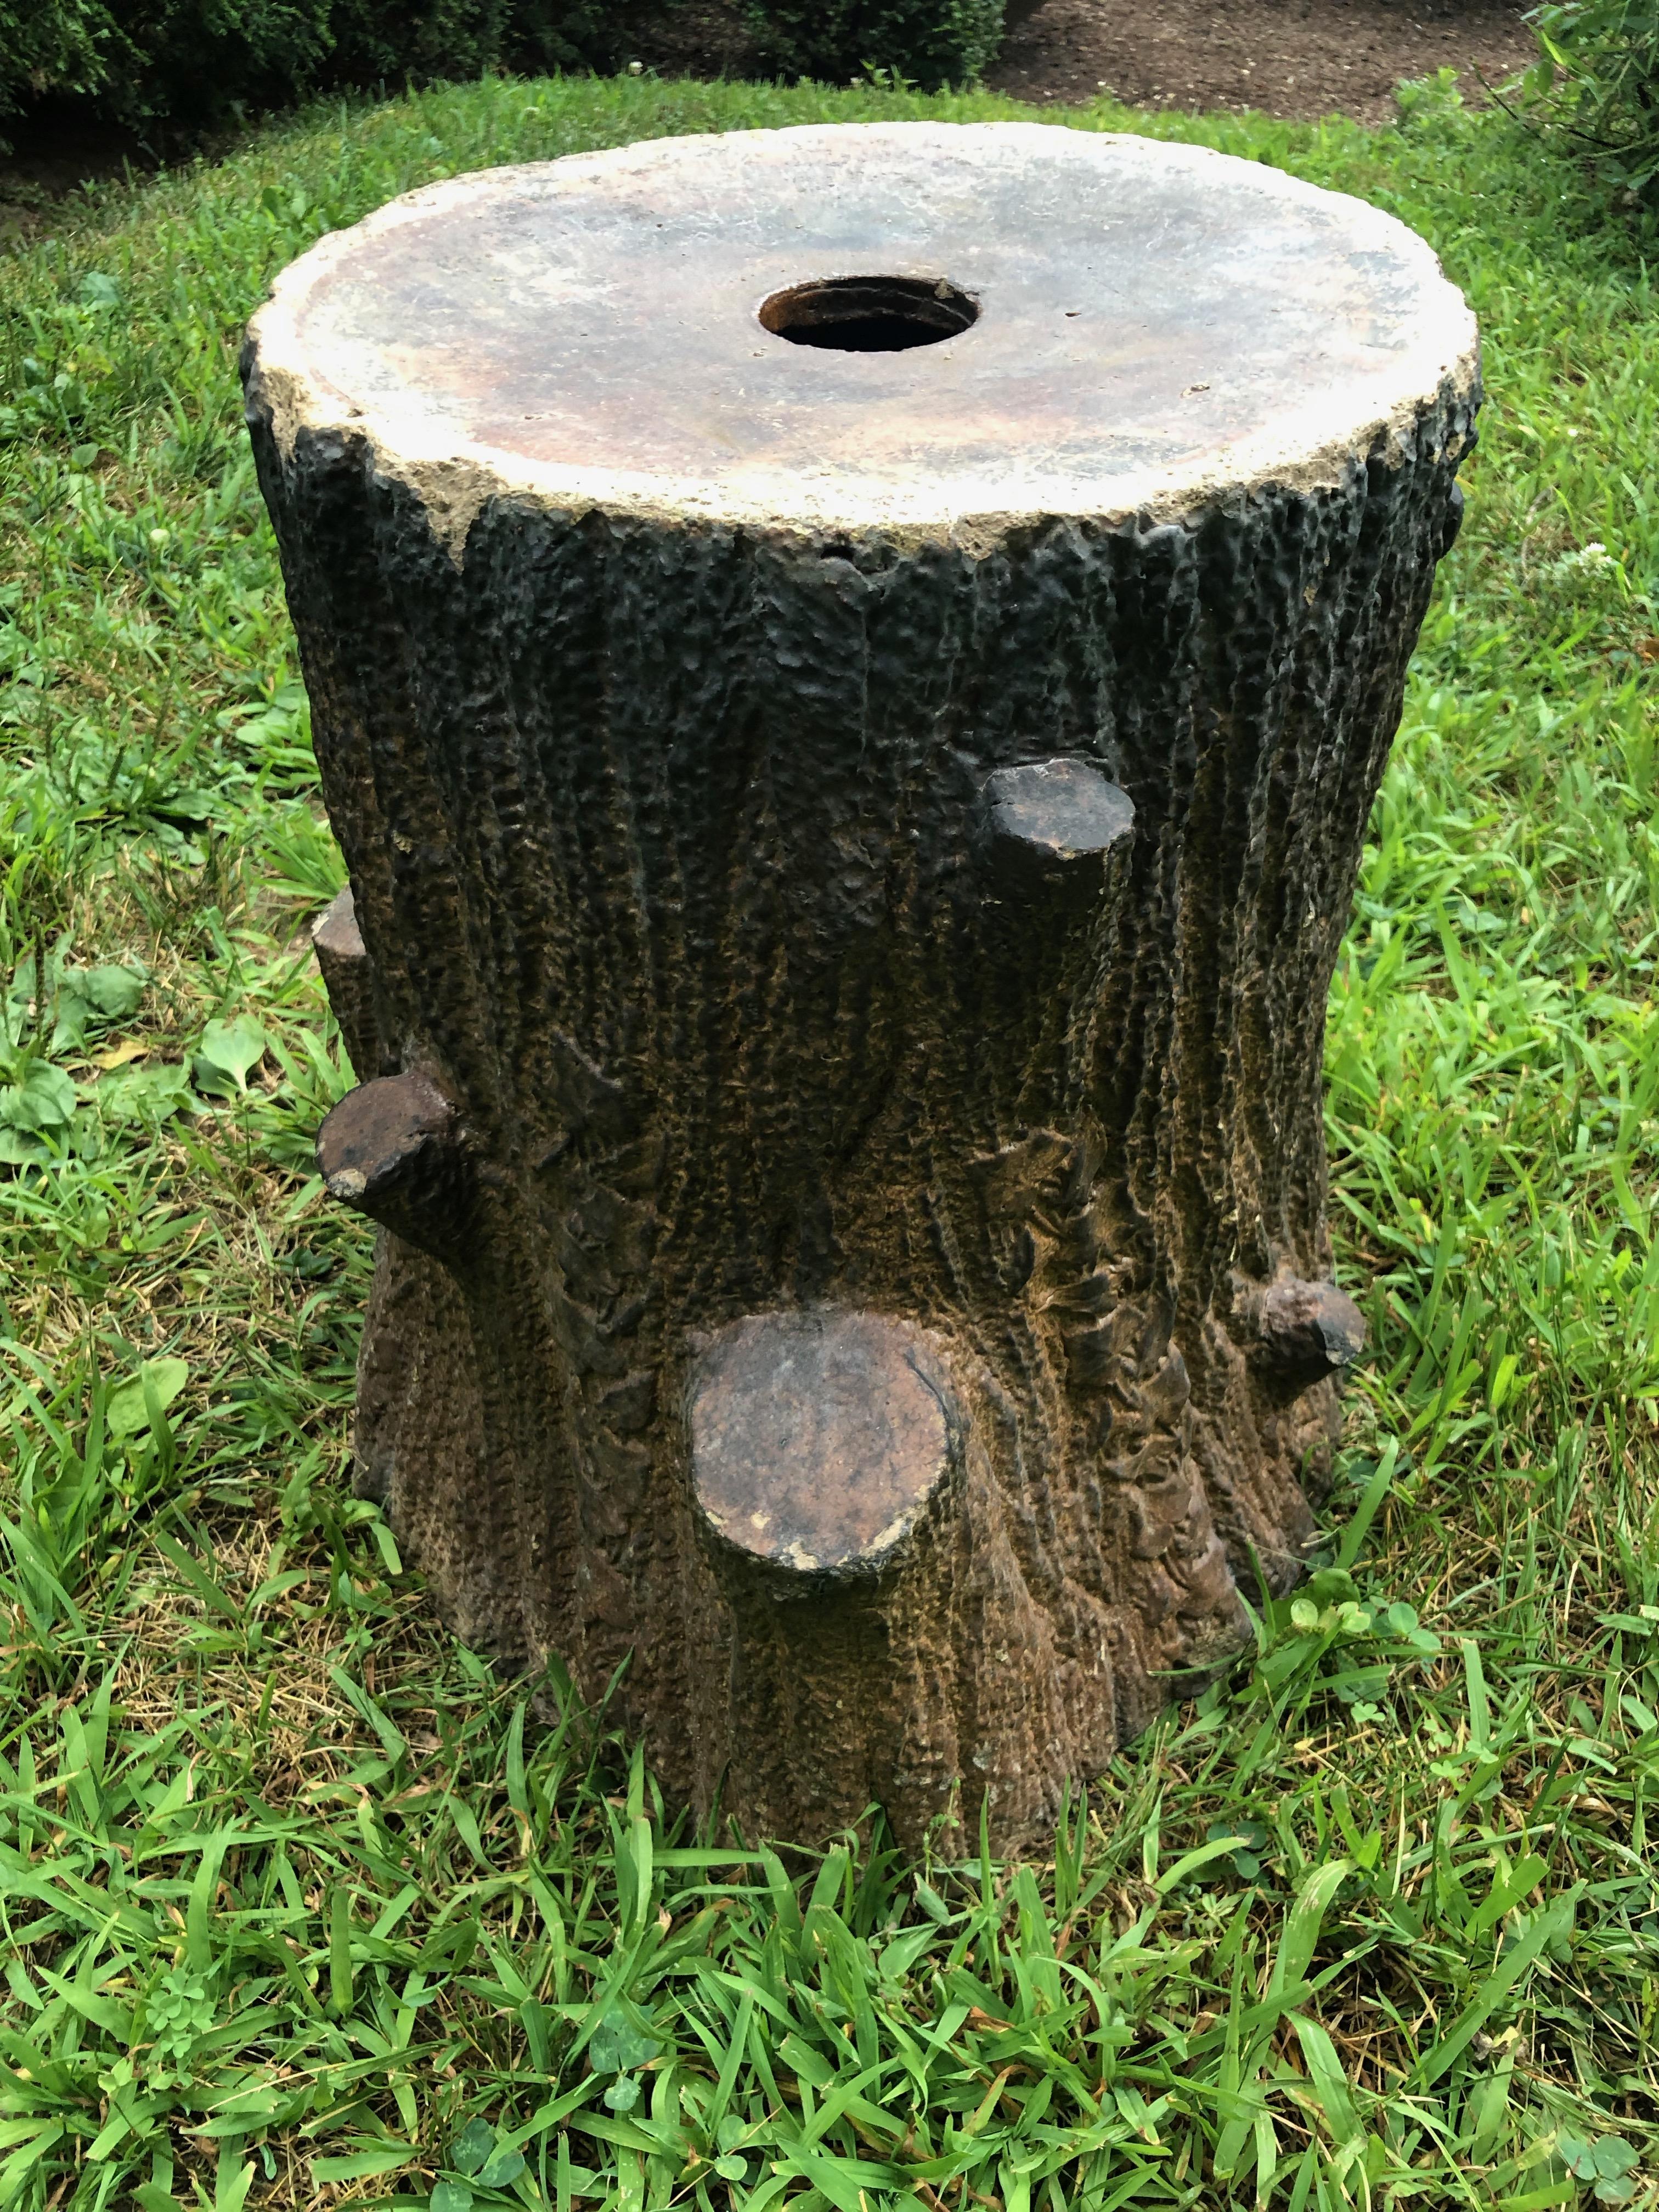 This little beauty has an extraordinary form, finish and coloration that really does resemble a tree trunk until you are up-close. And then it gets better! Intended as a garden seat, we think it would make an outstanding coffee or side table,